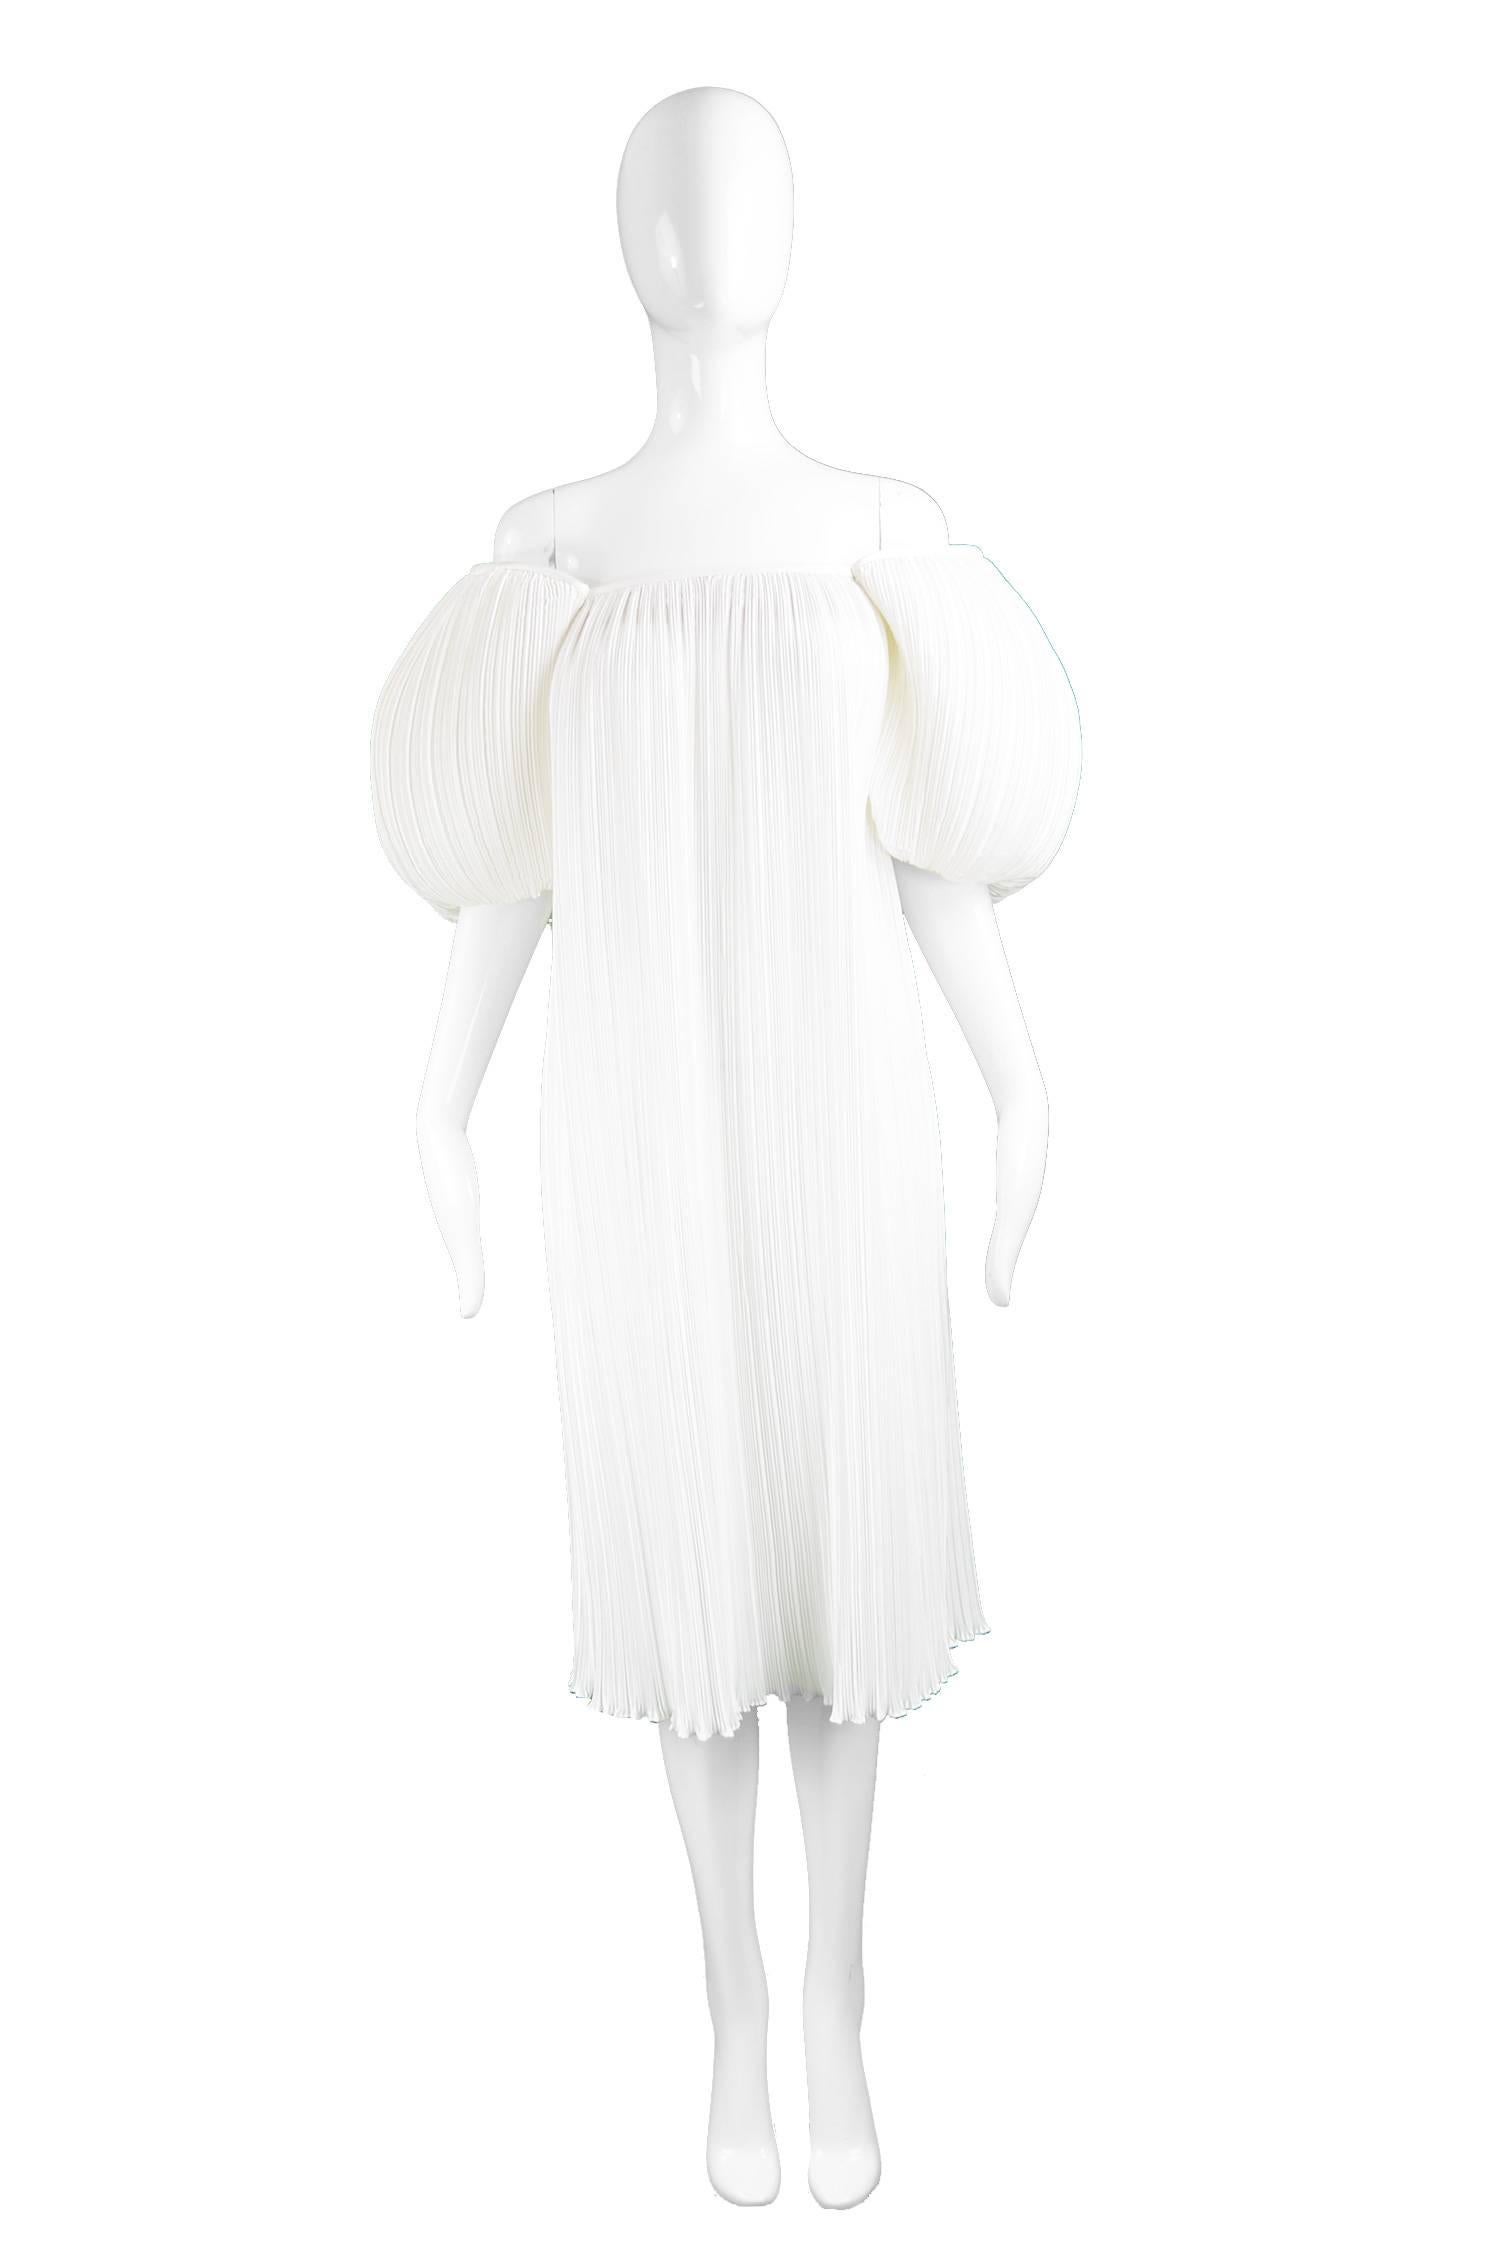 S.G. Gilbert for I. Magnin Vintage Ethereal White Fortuny Pleat Dress, 1980s

Estimated Size: UK 8/ US 4/ EU 36. Please check measurements.
Bust - 32” / 81cm
Waist - Free
Hips - Free
Length (Bust to Hem) - 37” / 94cm
 
Condition: Excellent Vintage